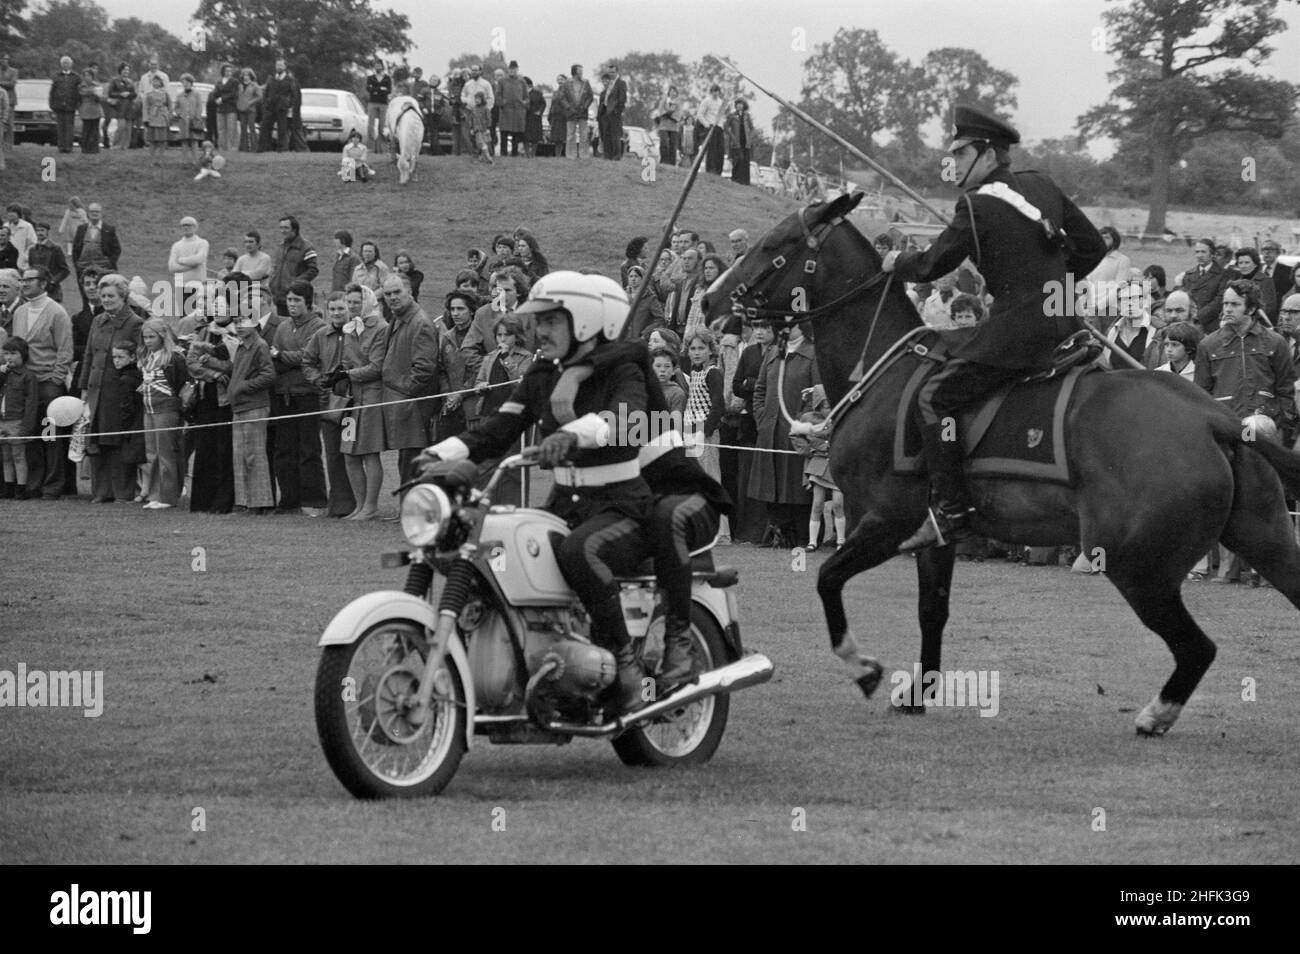 Laing Sports Ground, Rowley Lane, Elstree, Barnet, London, 18/06/1977. A motorbike and horse riding display by the Mounted Division of the Royal Military Police, during the Jubilee Gala Day held at the Laing Sports Ground. Stock Photo